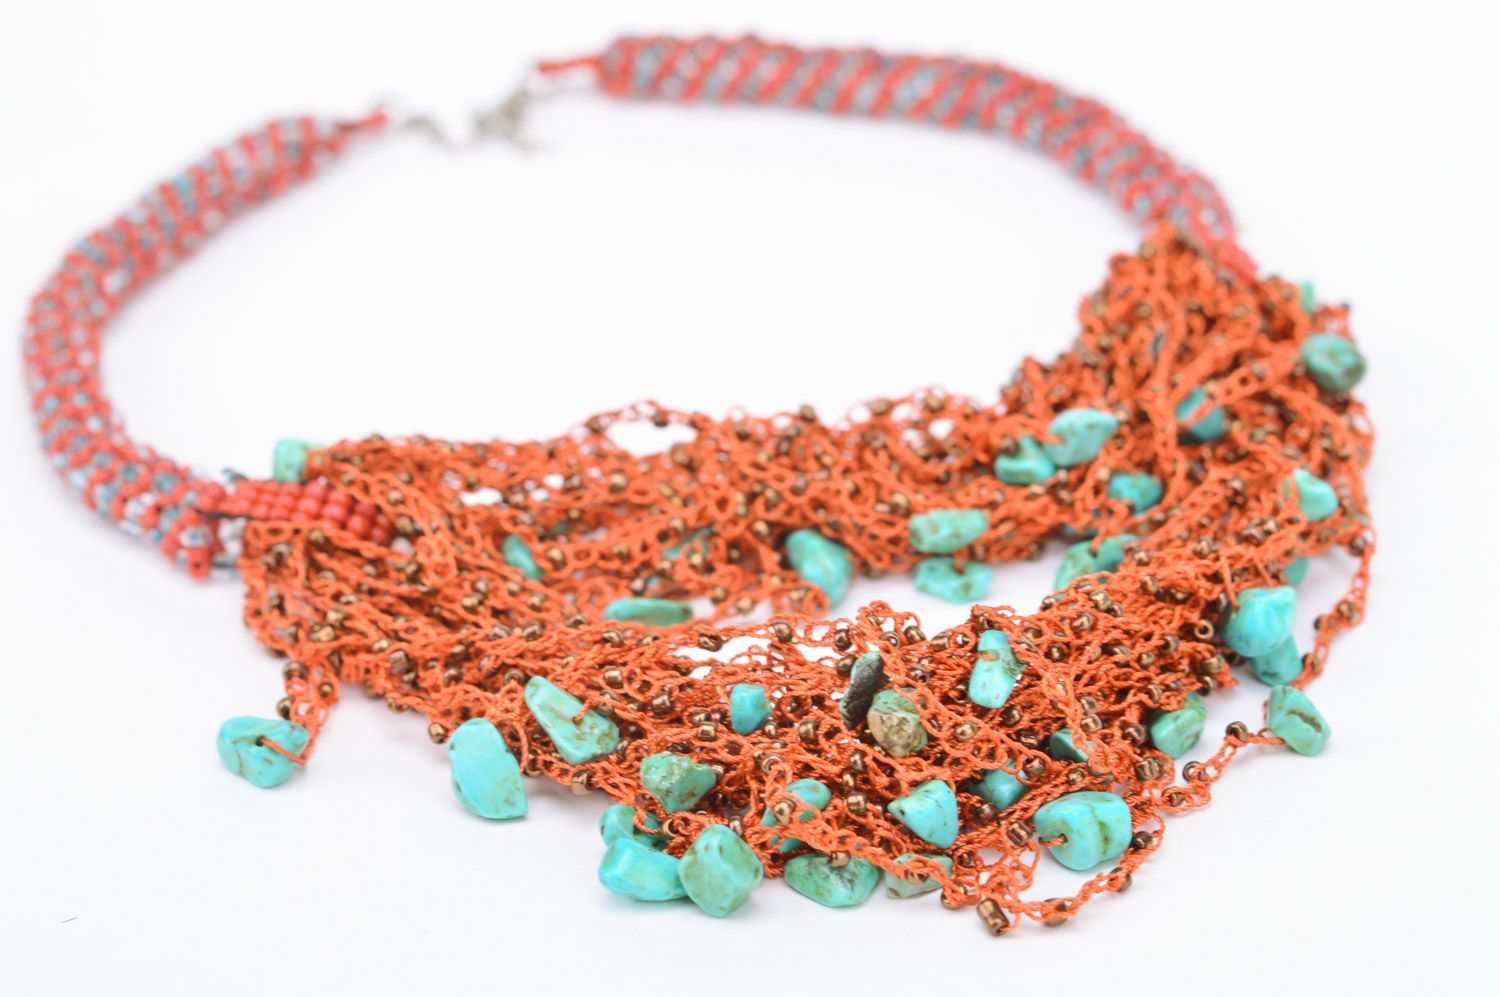 Handmade massive multi row necklace woven of Czech beads and turquoise beads photo 2